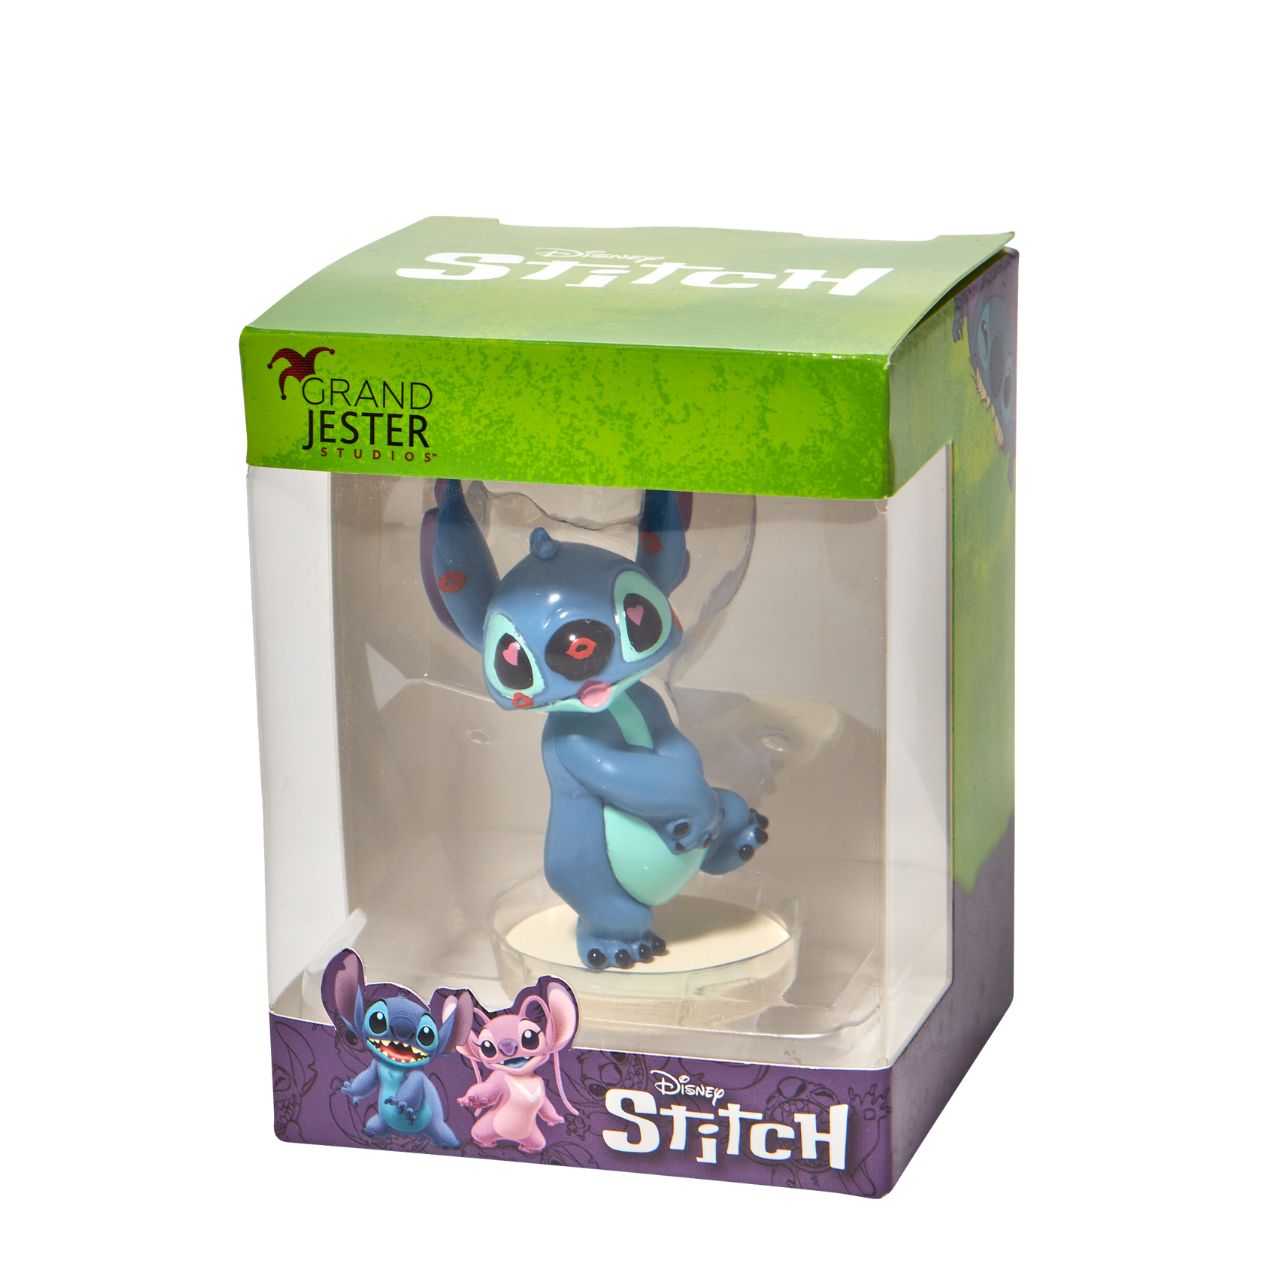 Grand Jester Stitch Covered in Kisses Mini Figurine  This super cute Stitch has been covered in lipstick kisses and looks loved up. He is made from high quality vinyl and is the perfect addition to any Stitch fans collection or bought as a gift for a birthday, Valentines or as a little treat.